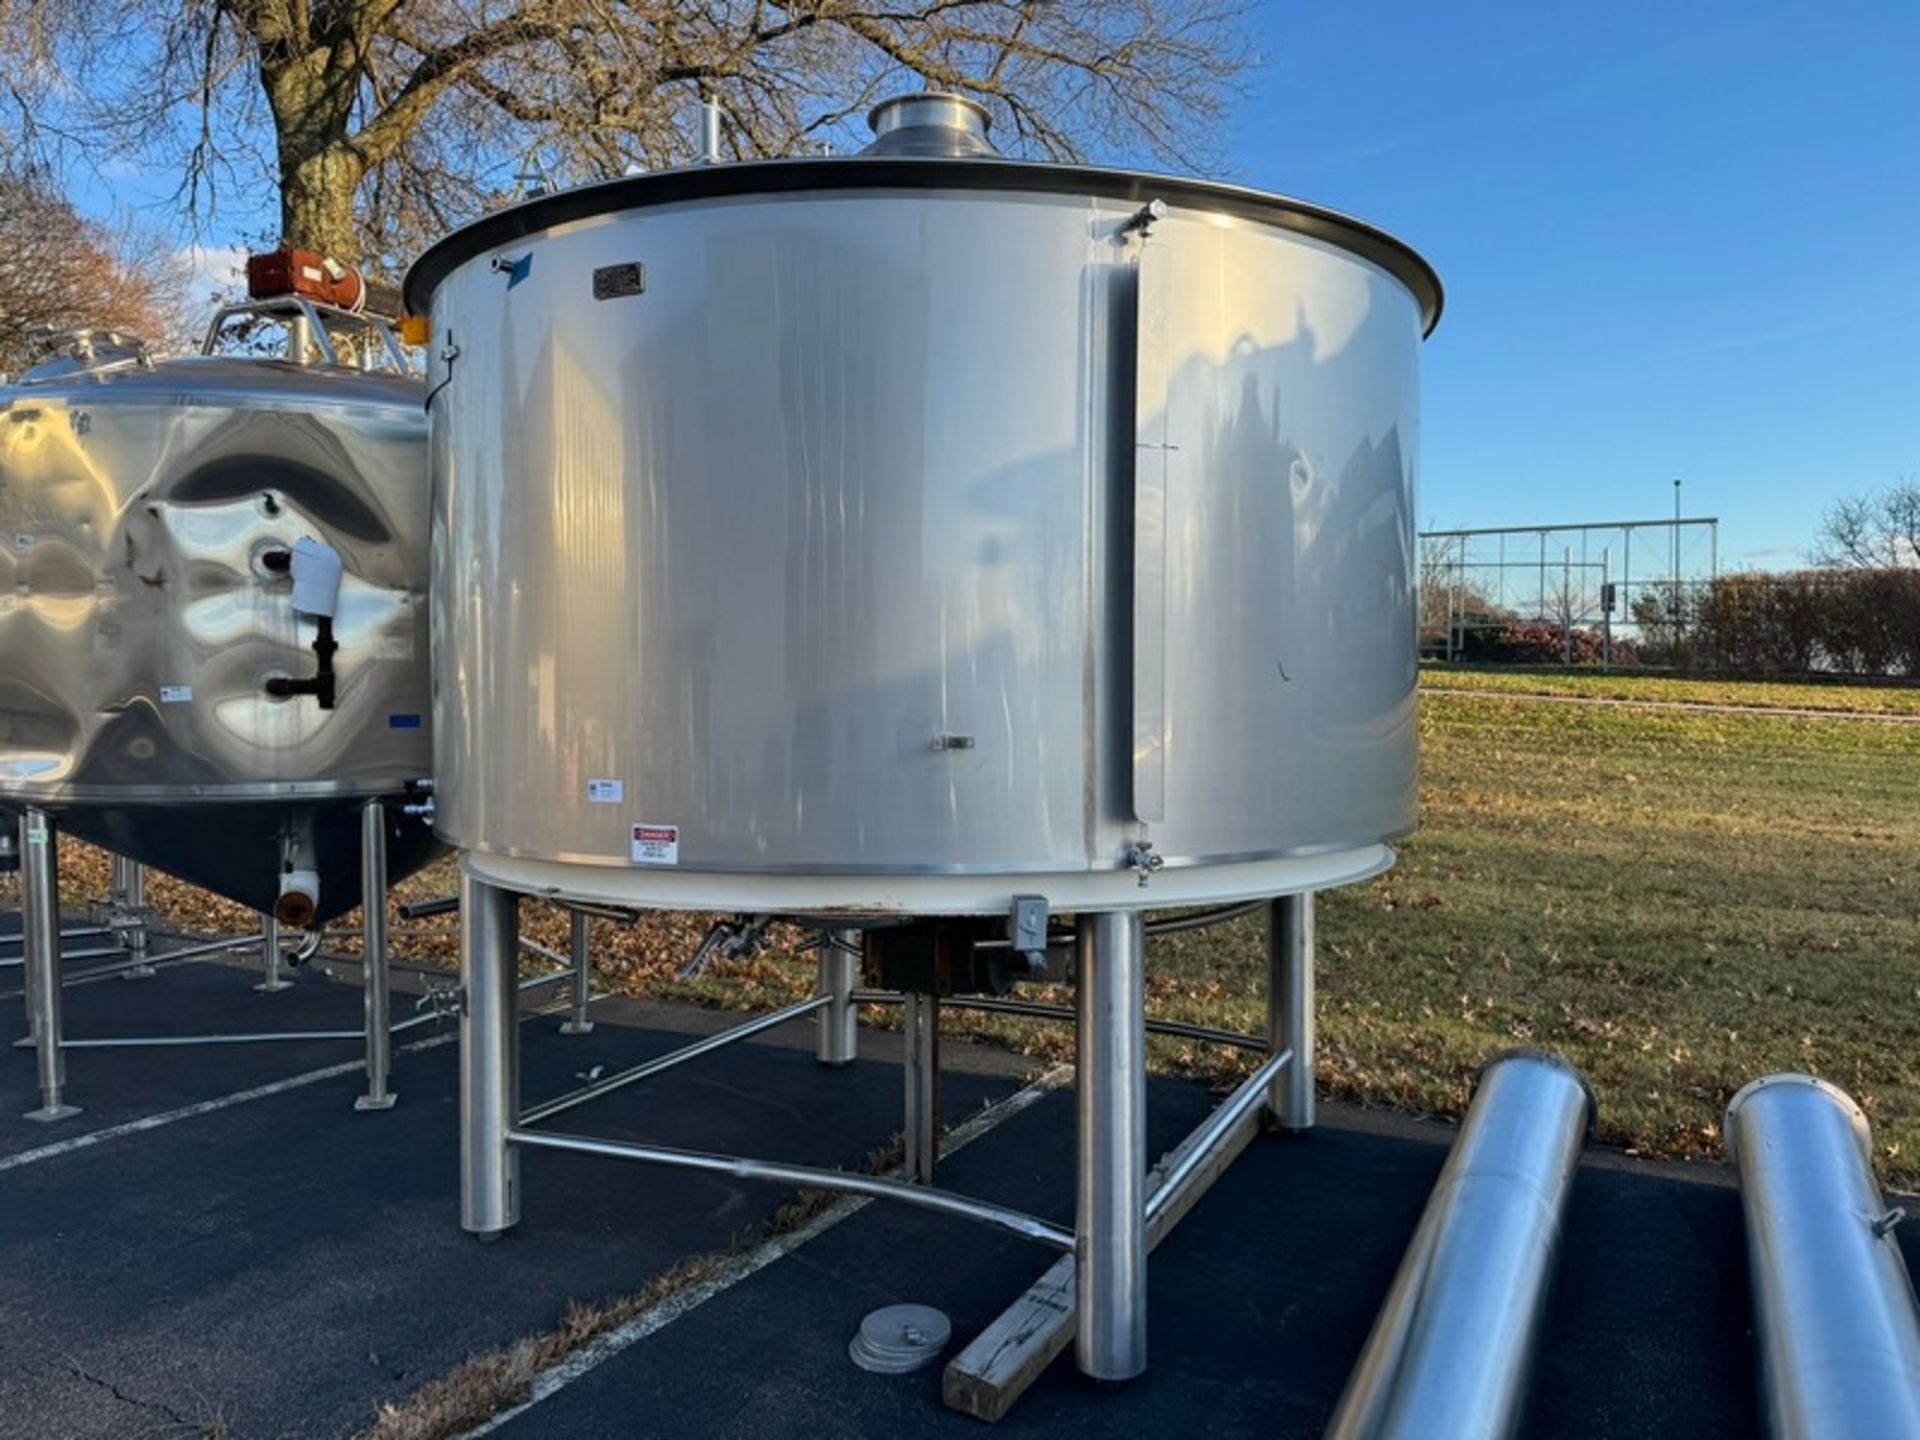 2012 Specific Mechanical Systems 45 BBL Capacity S/S Lauter Tun Tank, S/N RMP-136-12, with Legs, - Image 2 of 16